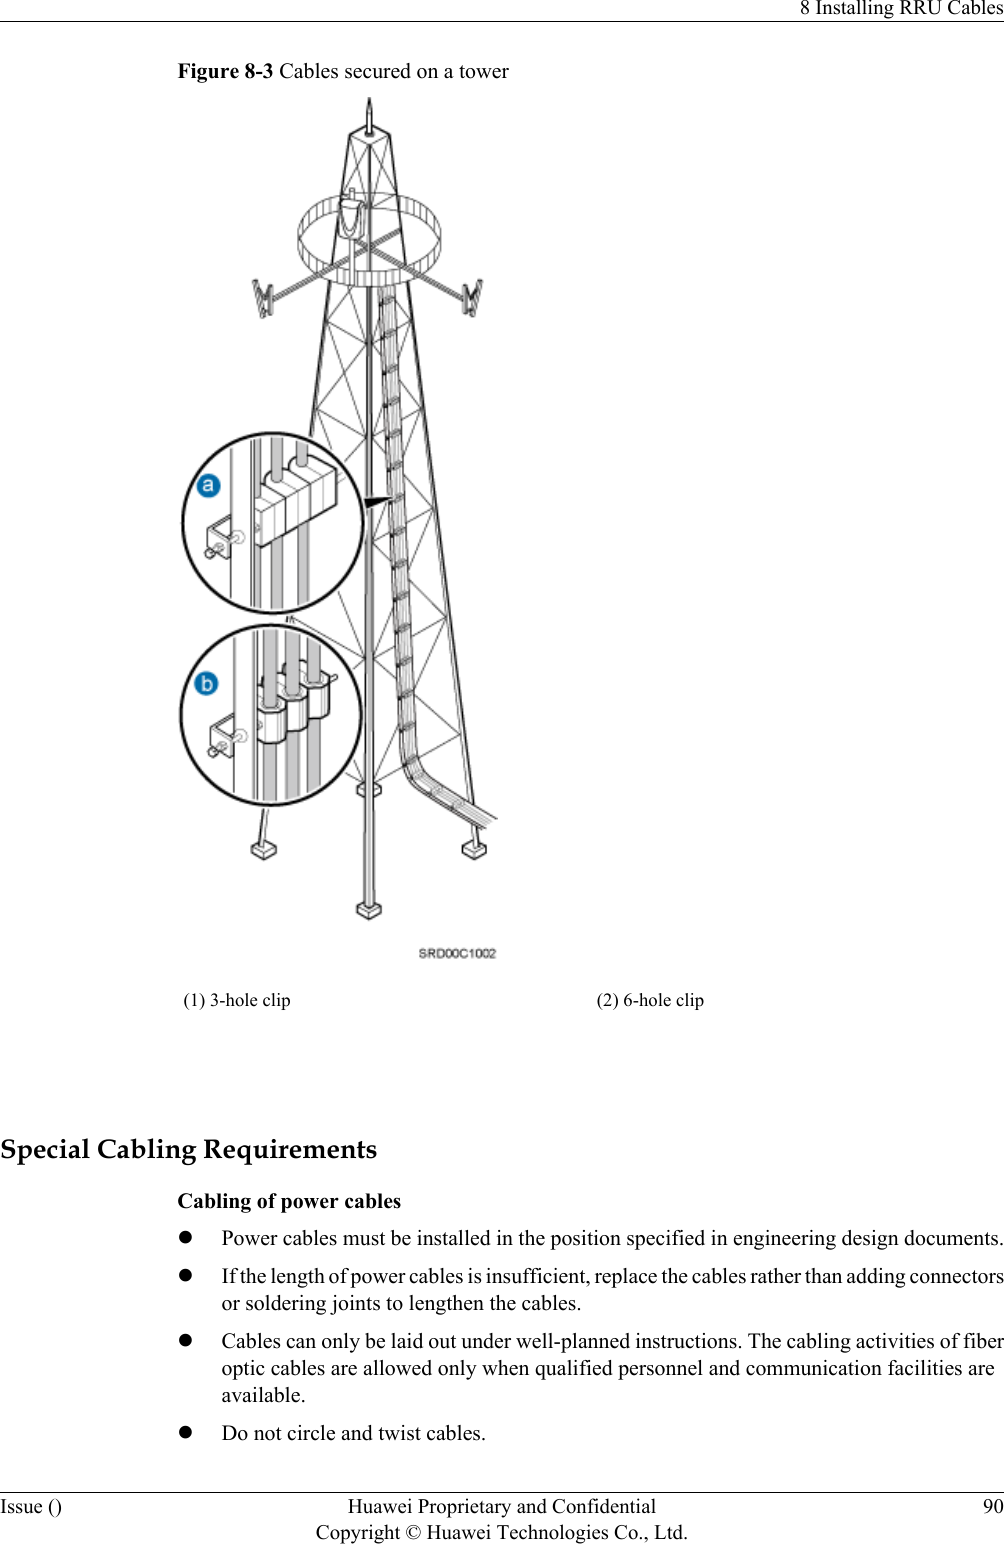 Figure 8-3 Cables secured on a tower(1) 3-hole clip (2) 6-hole clip Special Cabling RequirementsCabling of power cableslPower cables must be installed in the position specified in engineering design documents.lIf the length of power cables is insufficient, replace the cables rather than adding connectorsor soldering joints to lengthen the cables.lCables can only be laid out under well-planned instructions. The cabling activities of fiberoptic cables are allowed only when qualified personnel and communication facilities areavailable.lDo not circle and twist cables.8 Installing RRU CablesIssue () Huawei Proprietary and ConfidentialCopyright © Huawei Technologies Co., Ltd.90